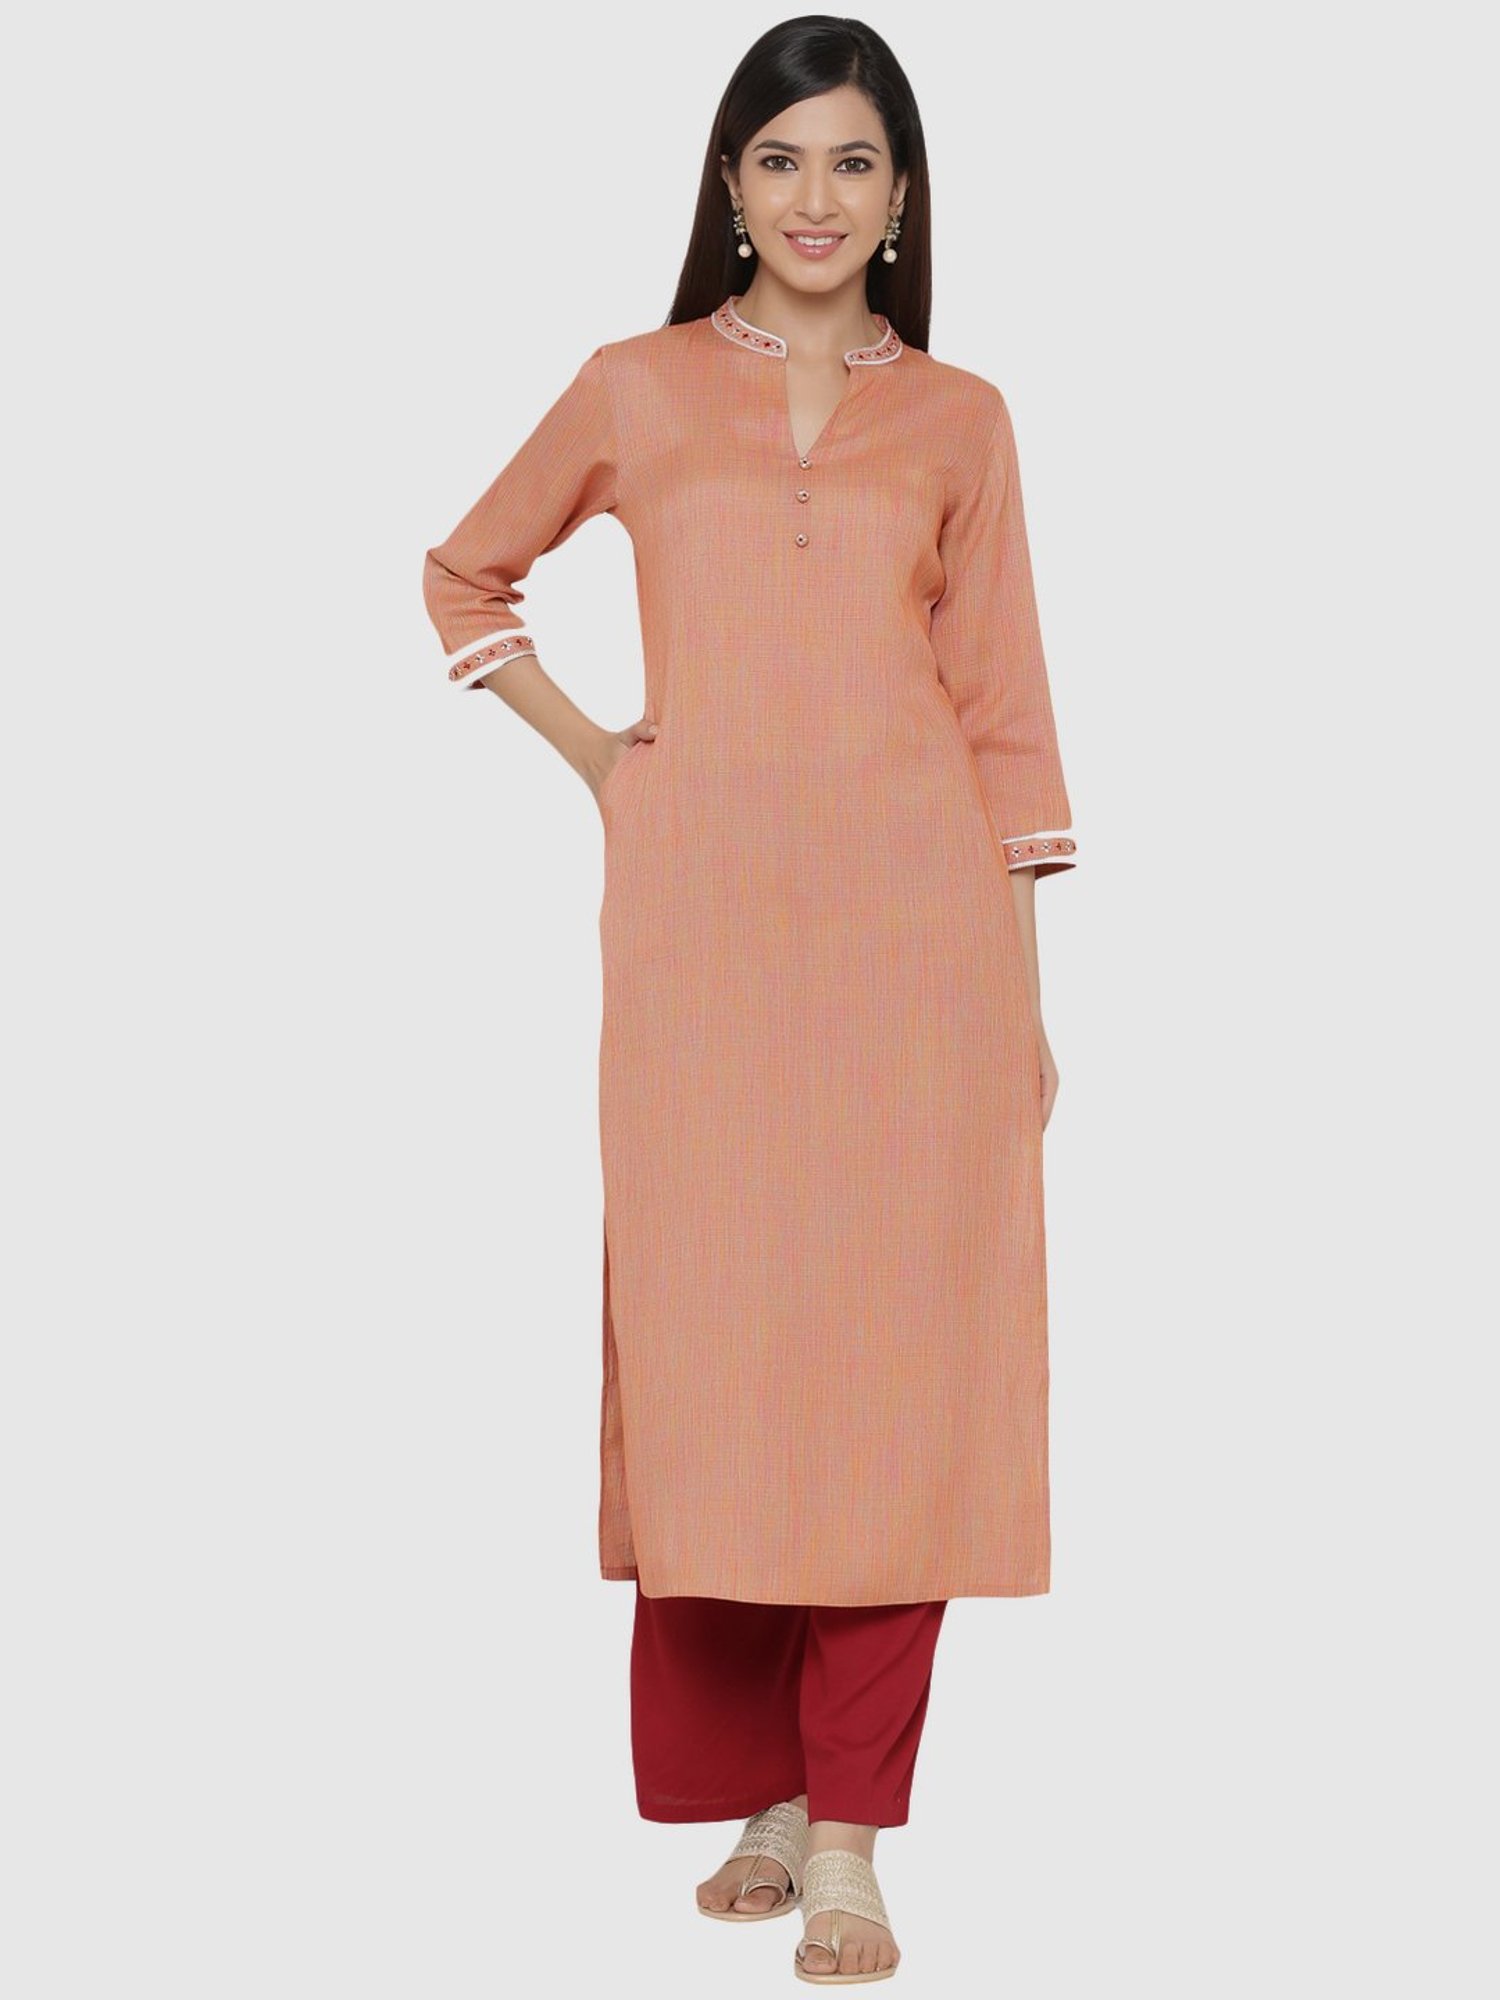 Stunning Peach Colored Casual Wear Embroidered Heavy Pure Cotton Kurti